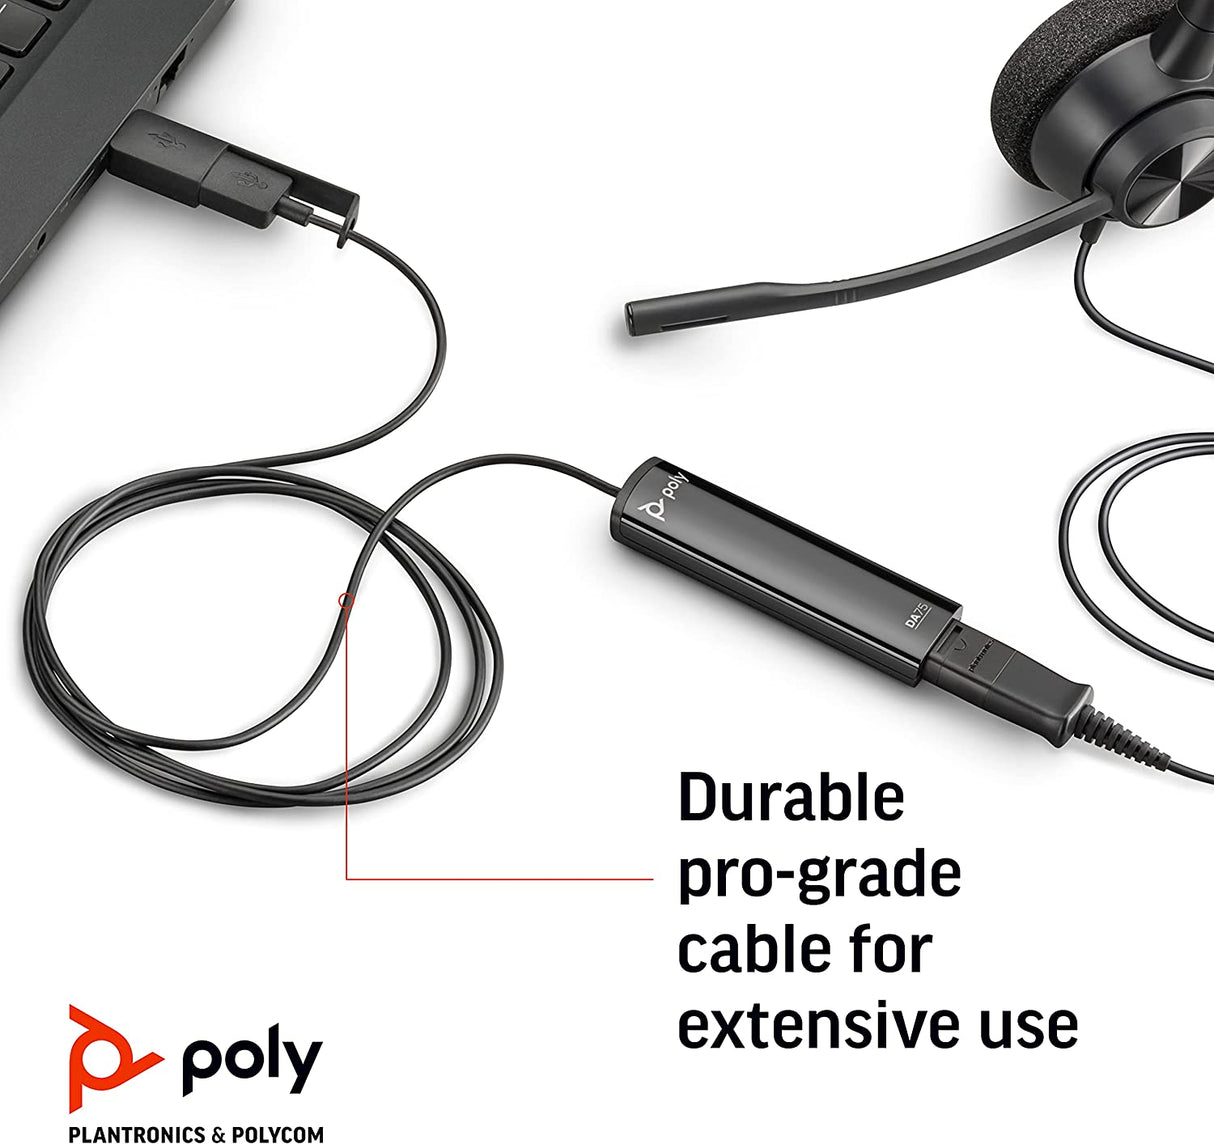 Poly - DA75 USB-A/USB-C digital adapter (Plantronics) - Works with Poly Call Center Quick Disconnect (QD) Headsets - Acoustic Hearing Protection -Works with Avaya, Genesys,&amp;Cisco call center platforms Standard Version Digital Adapter